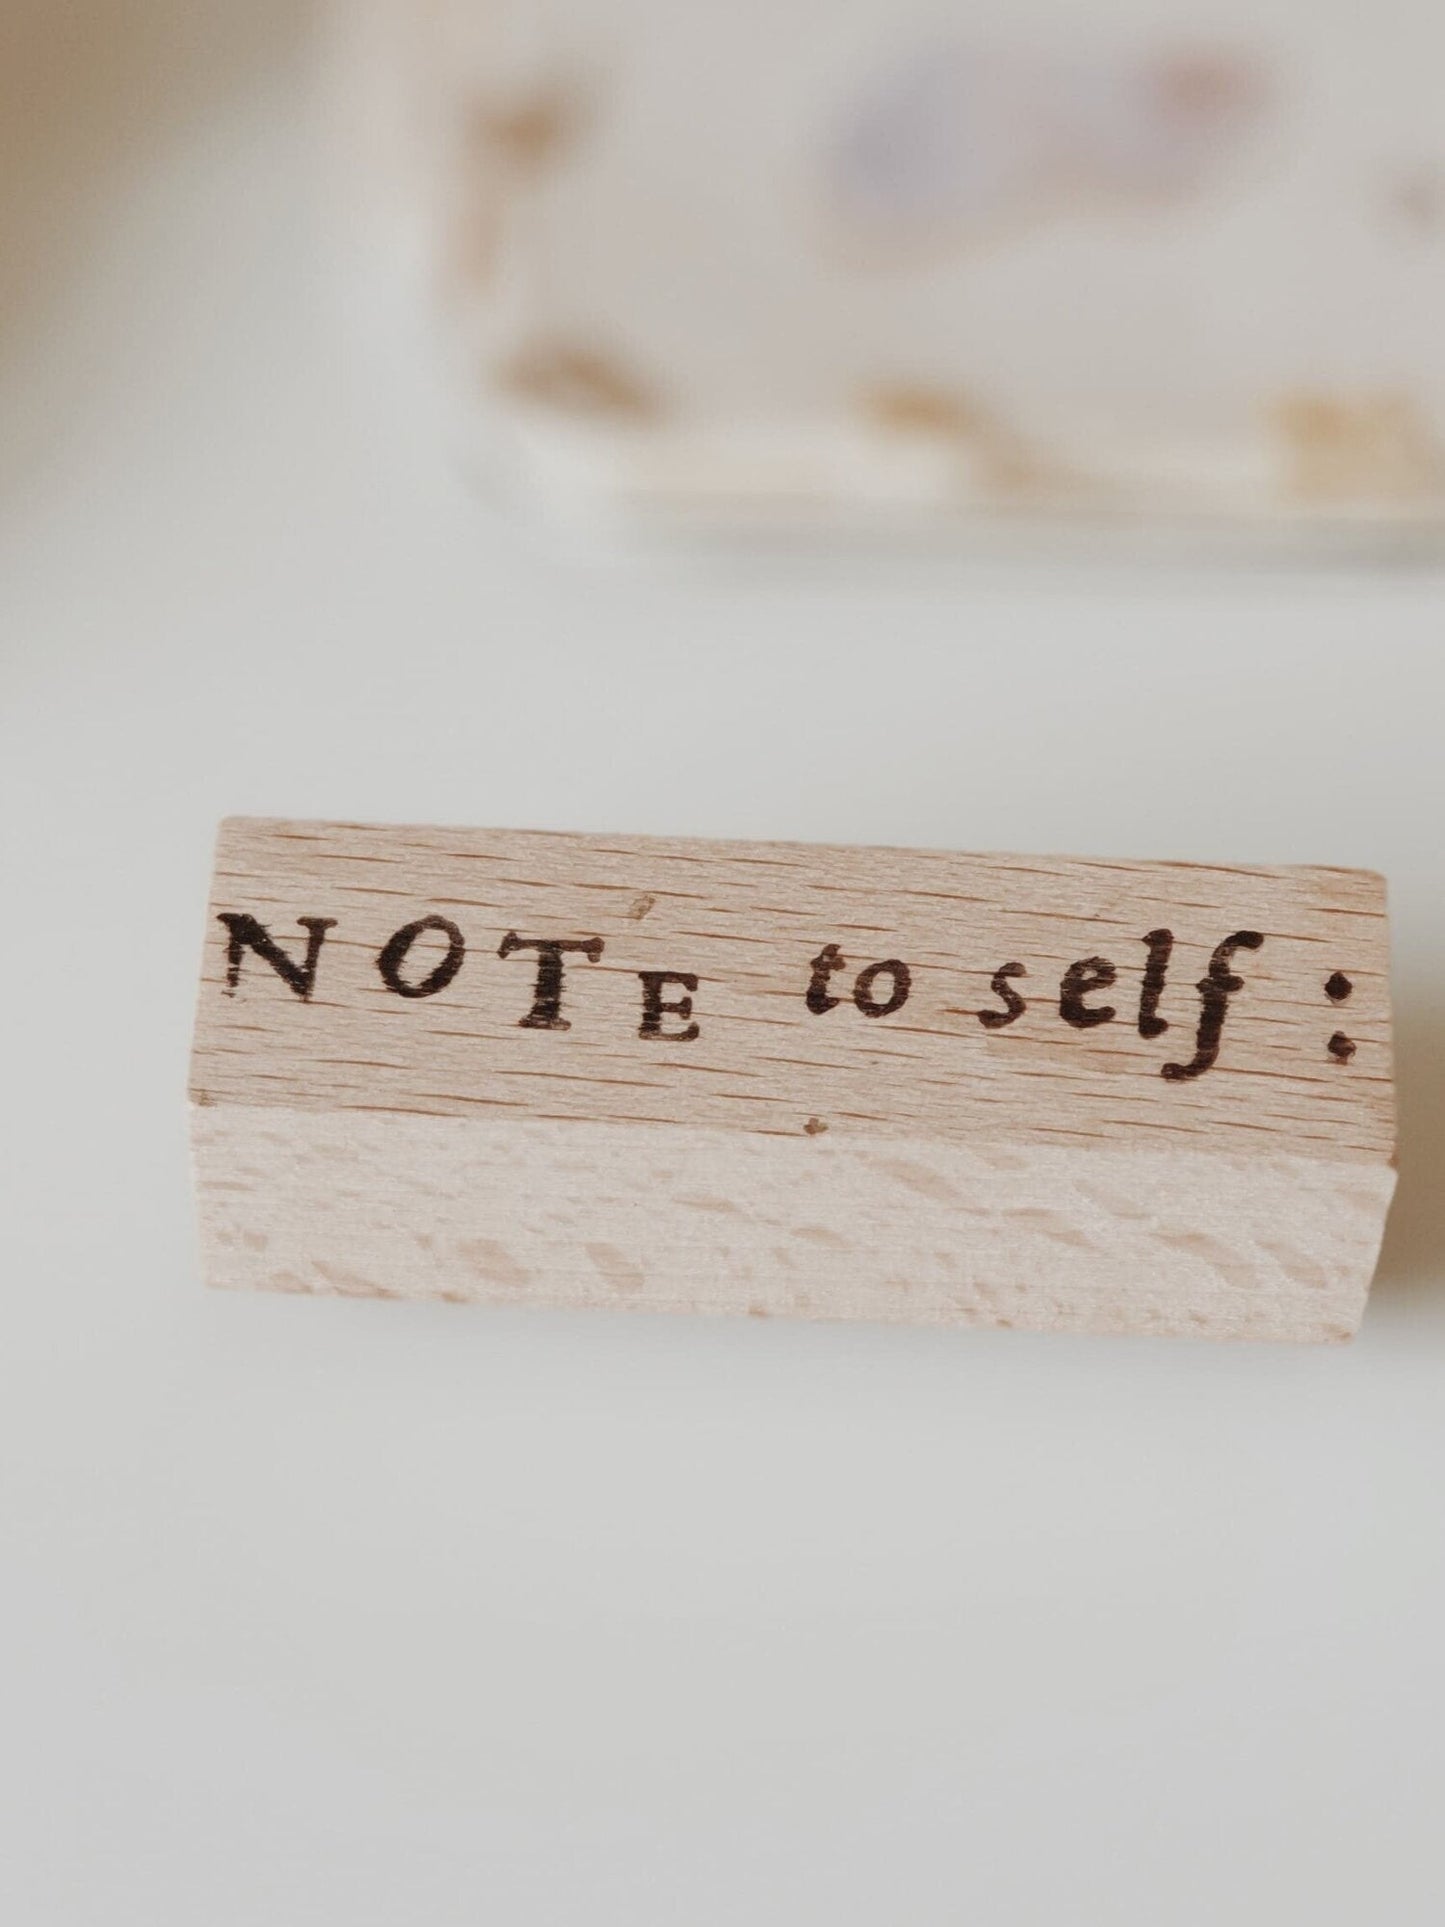 Yeon Charm Note to Self Rubber Stamp, 1 PC